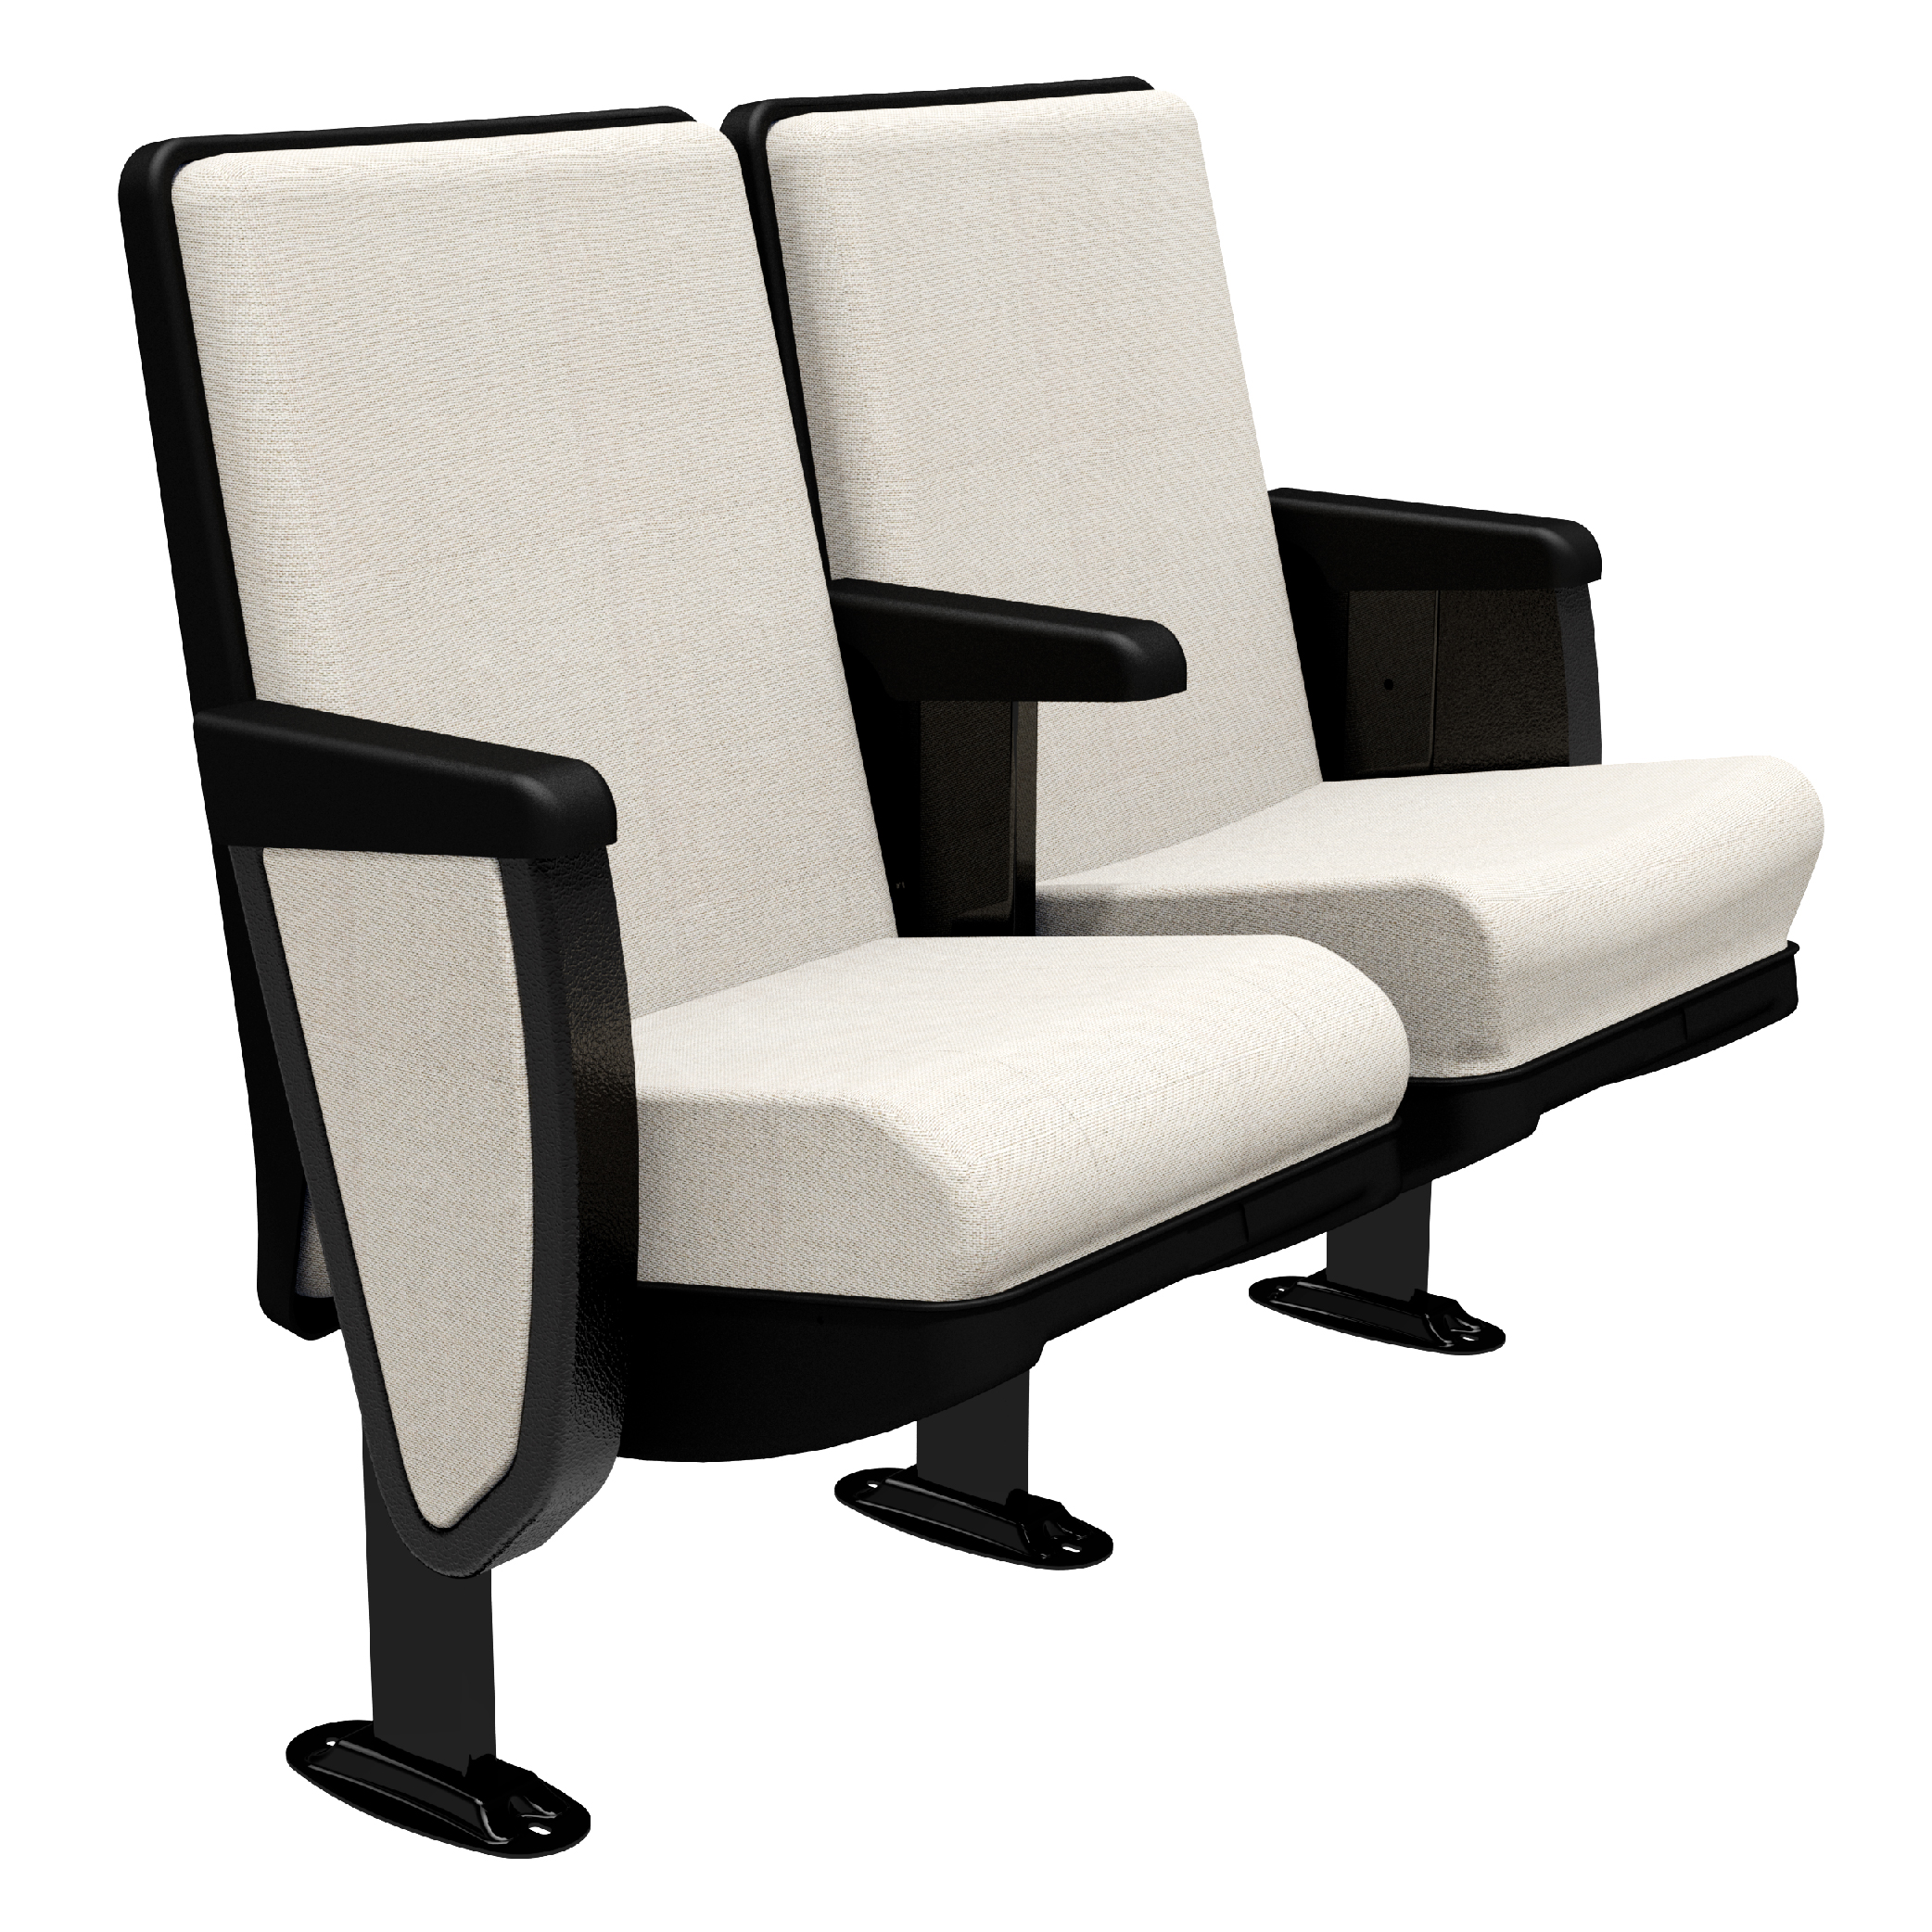 Our Convention Compact Model Theater seat for churches and synagogues from Woods Church Interiors